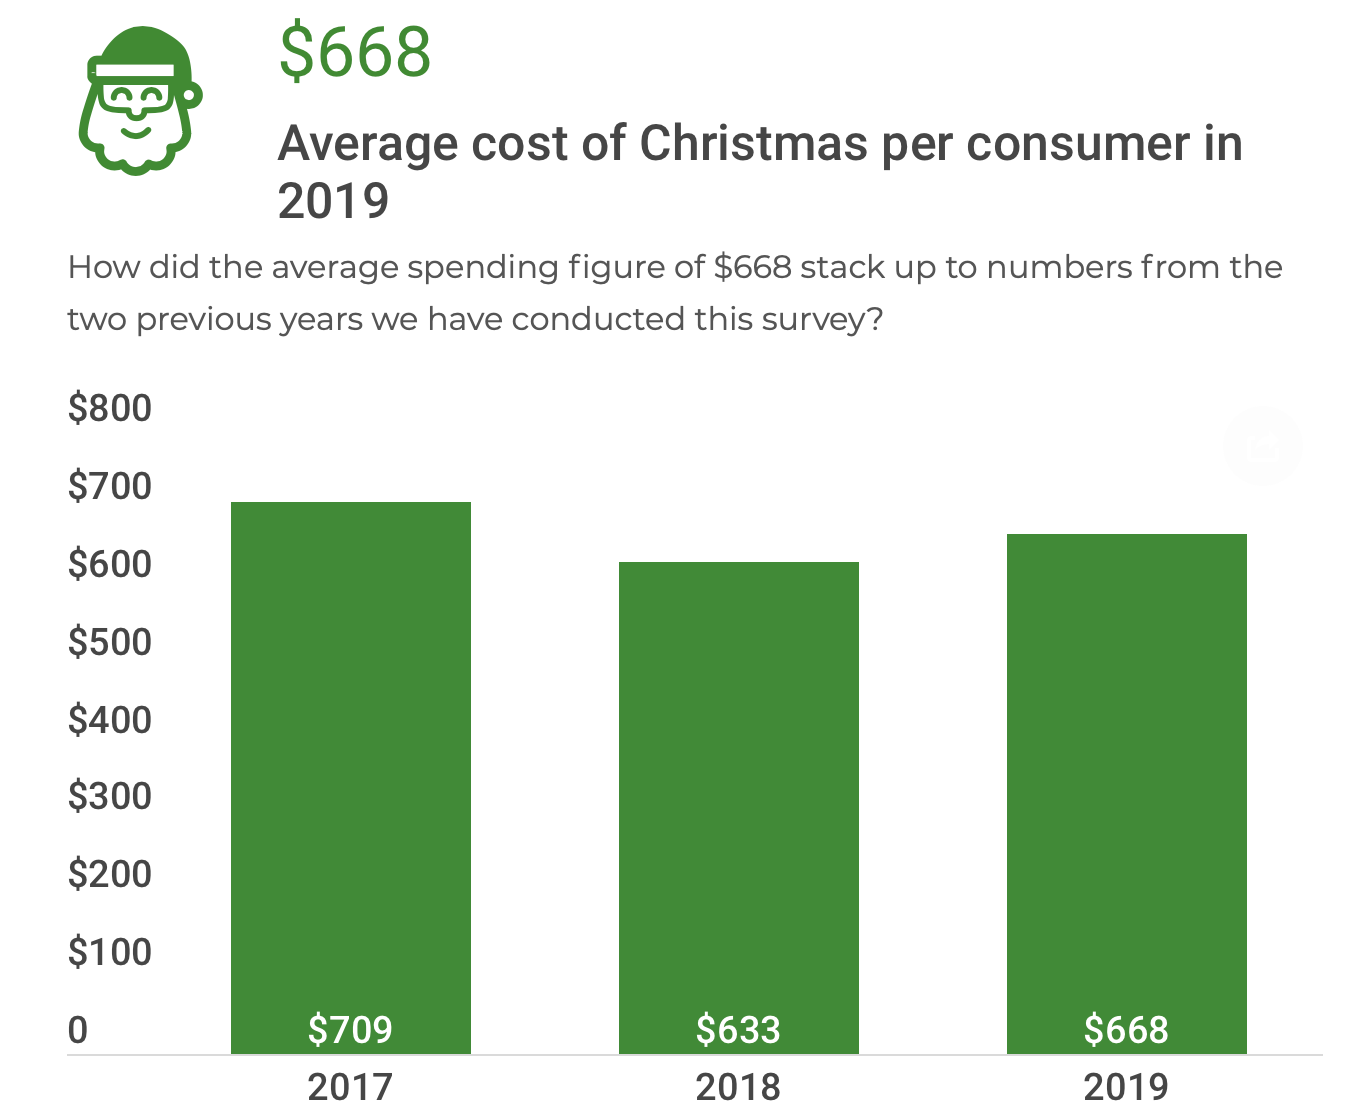 The cost of Christmas in 2019